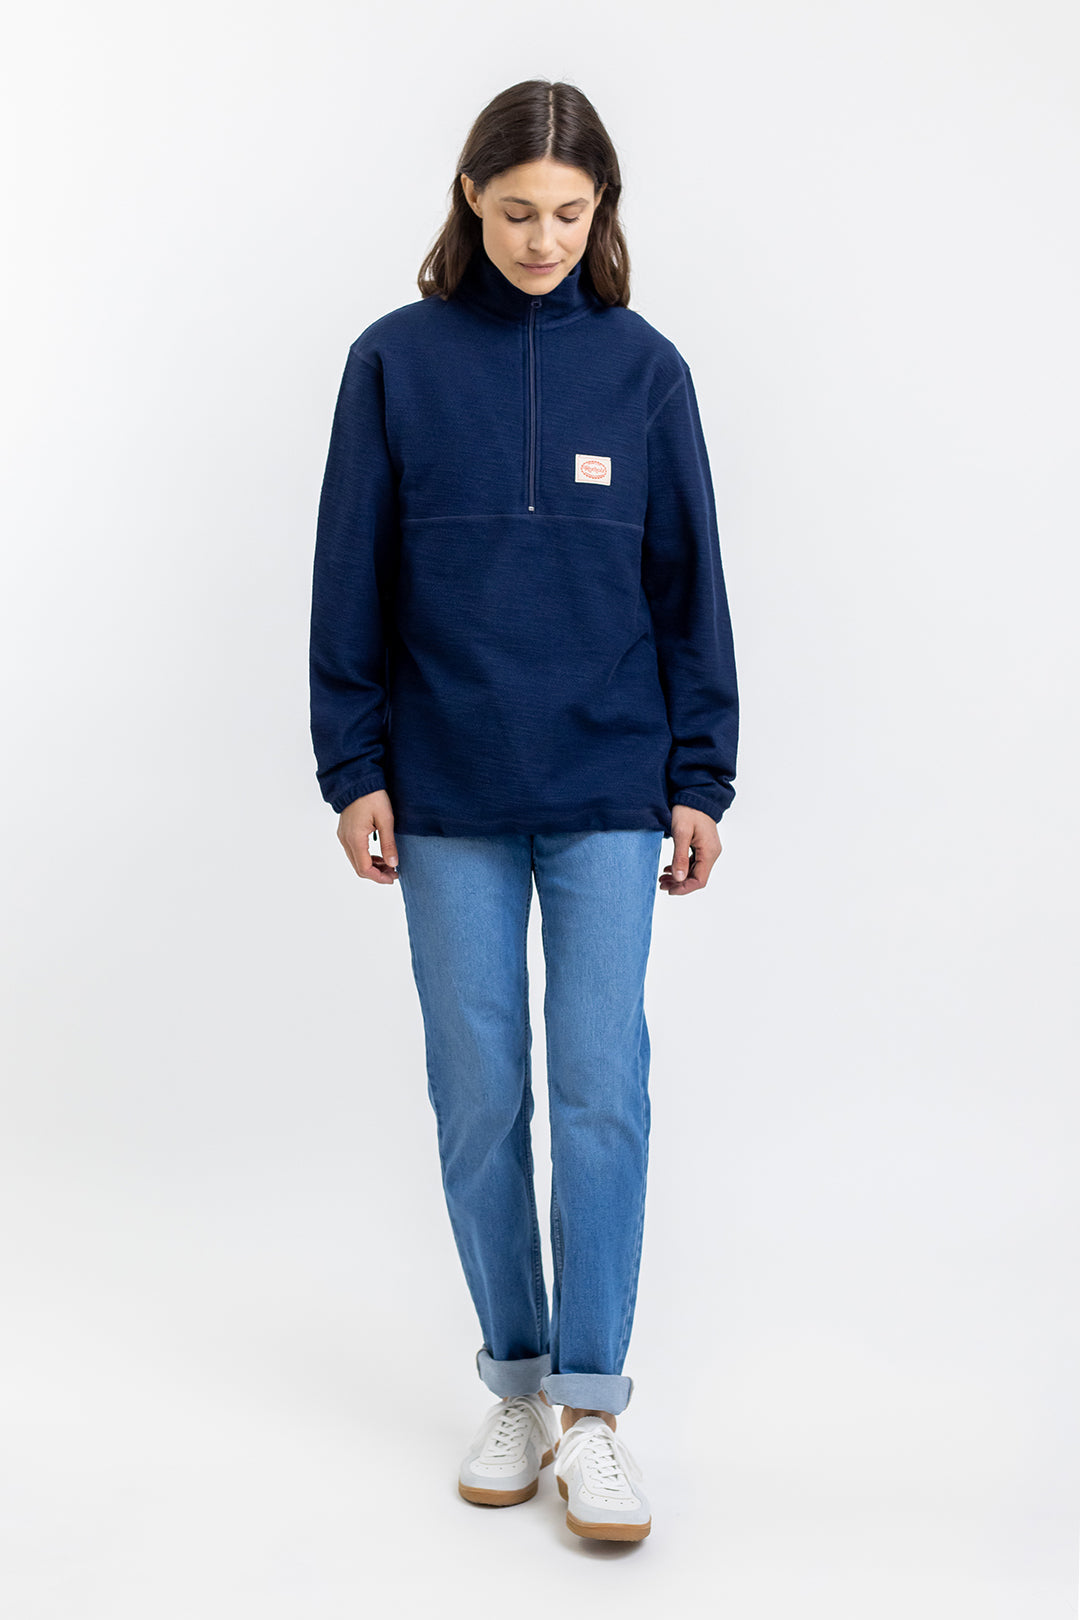 Dark blue zip-up sweatshirt Divided made of 100% cotton from Rotholz